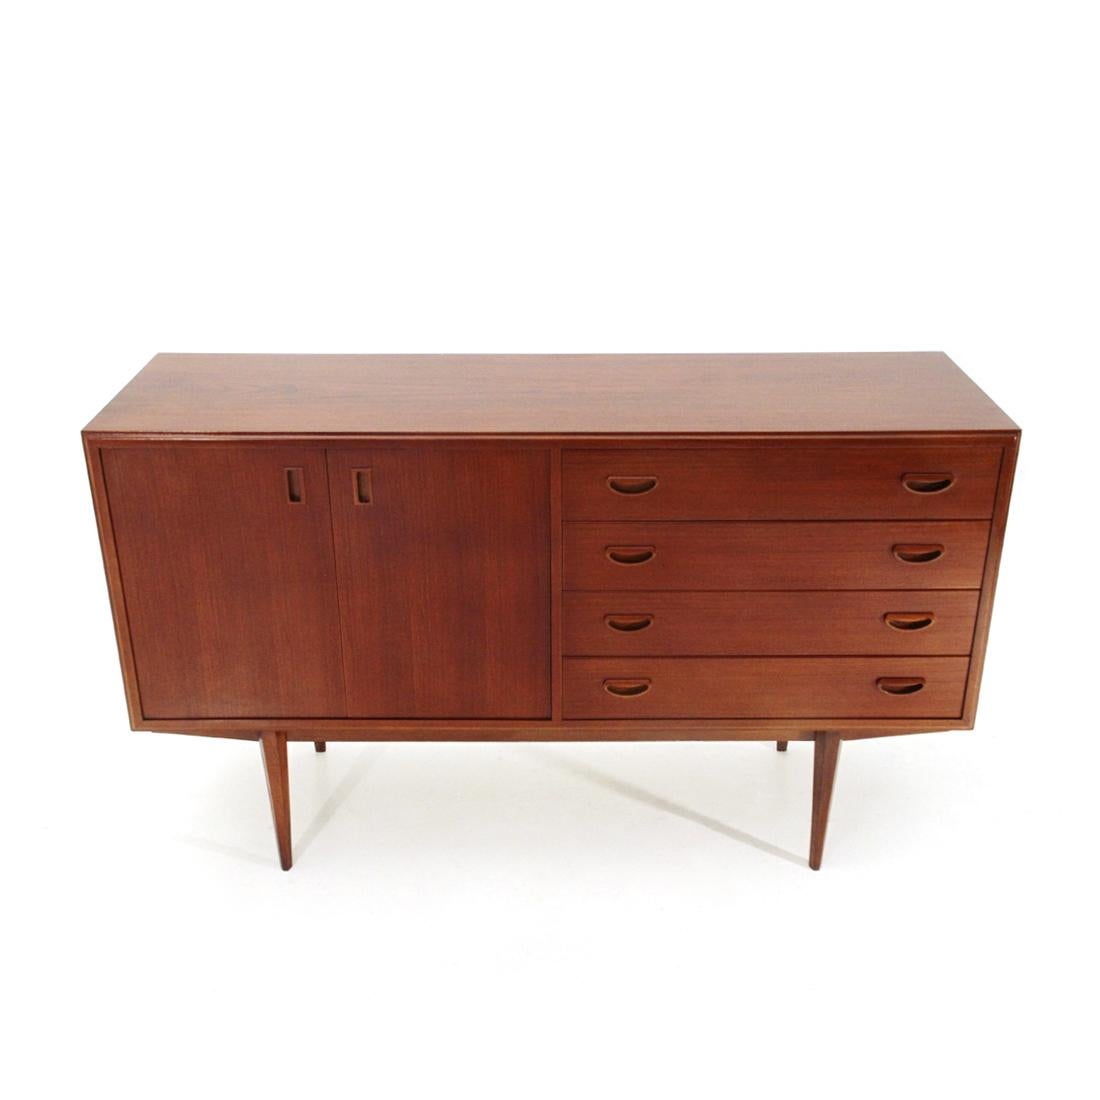 Sideboard of Italian manufacture produced in the 1960s.
Structure in veneered wood with slightly rounded profiles.
Storage compartment with internal shelf.
Four drawers.
Handles in shaped wood.
Support structure in solid wood.
Good general